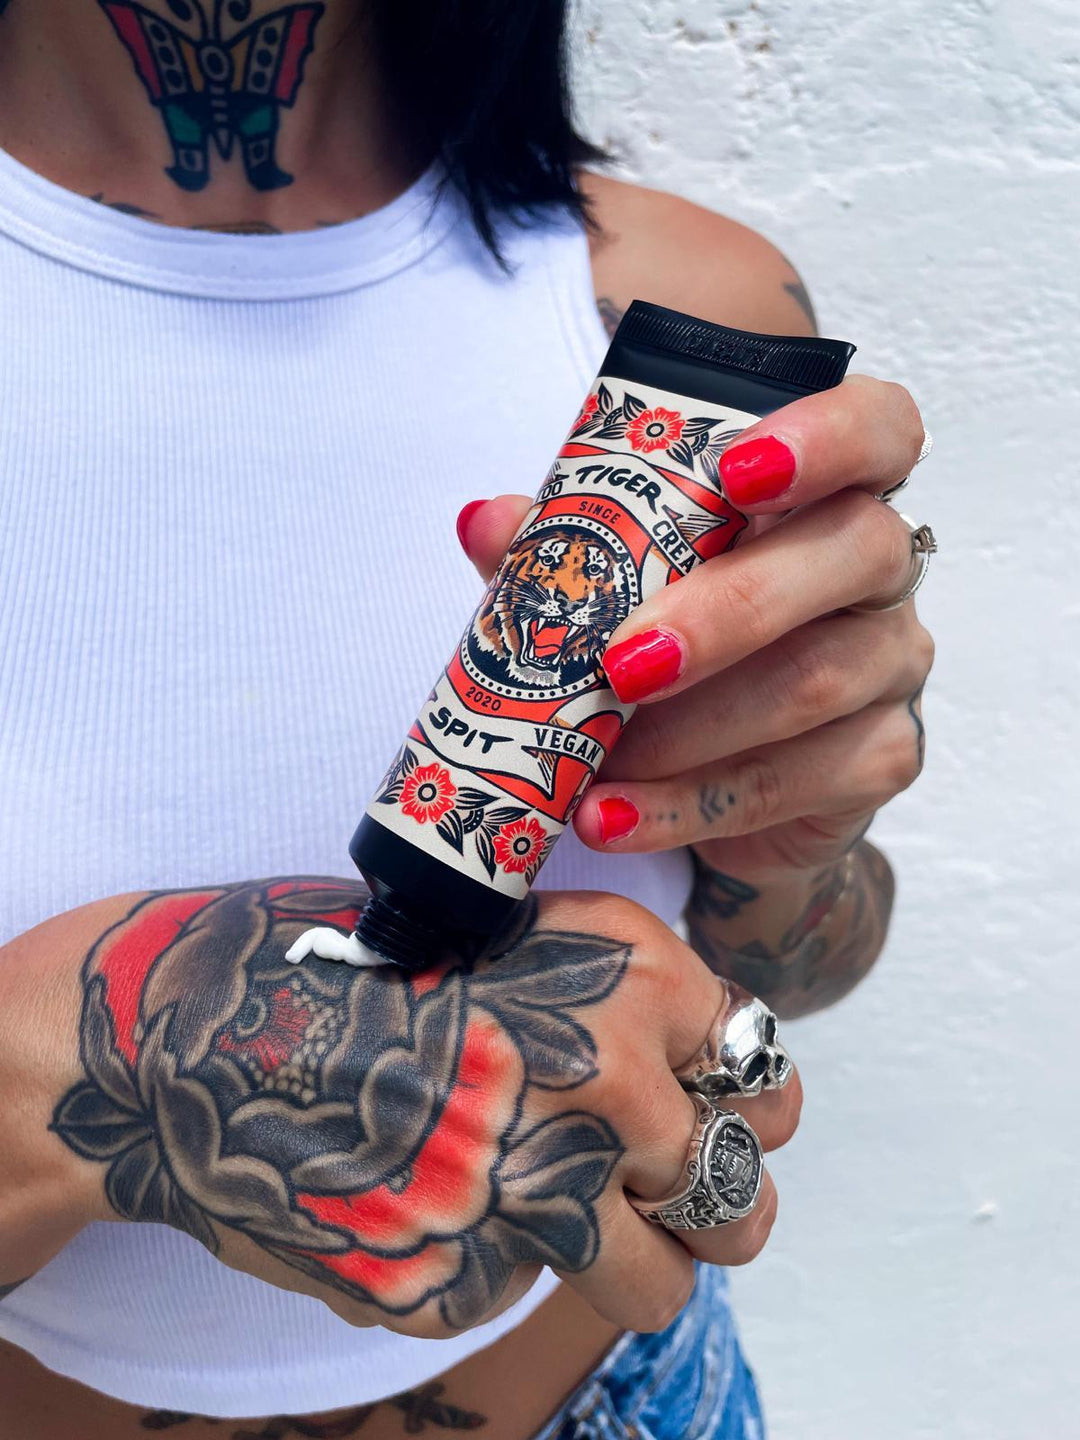 Tiger Spit: The Best Tattoo Cream - Deep Care and Lasting Protection" - TIGER SPIT 